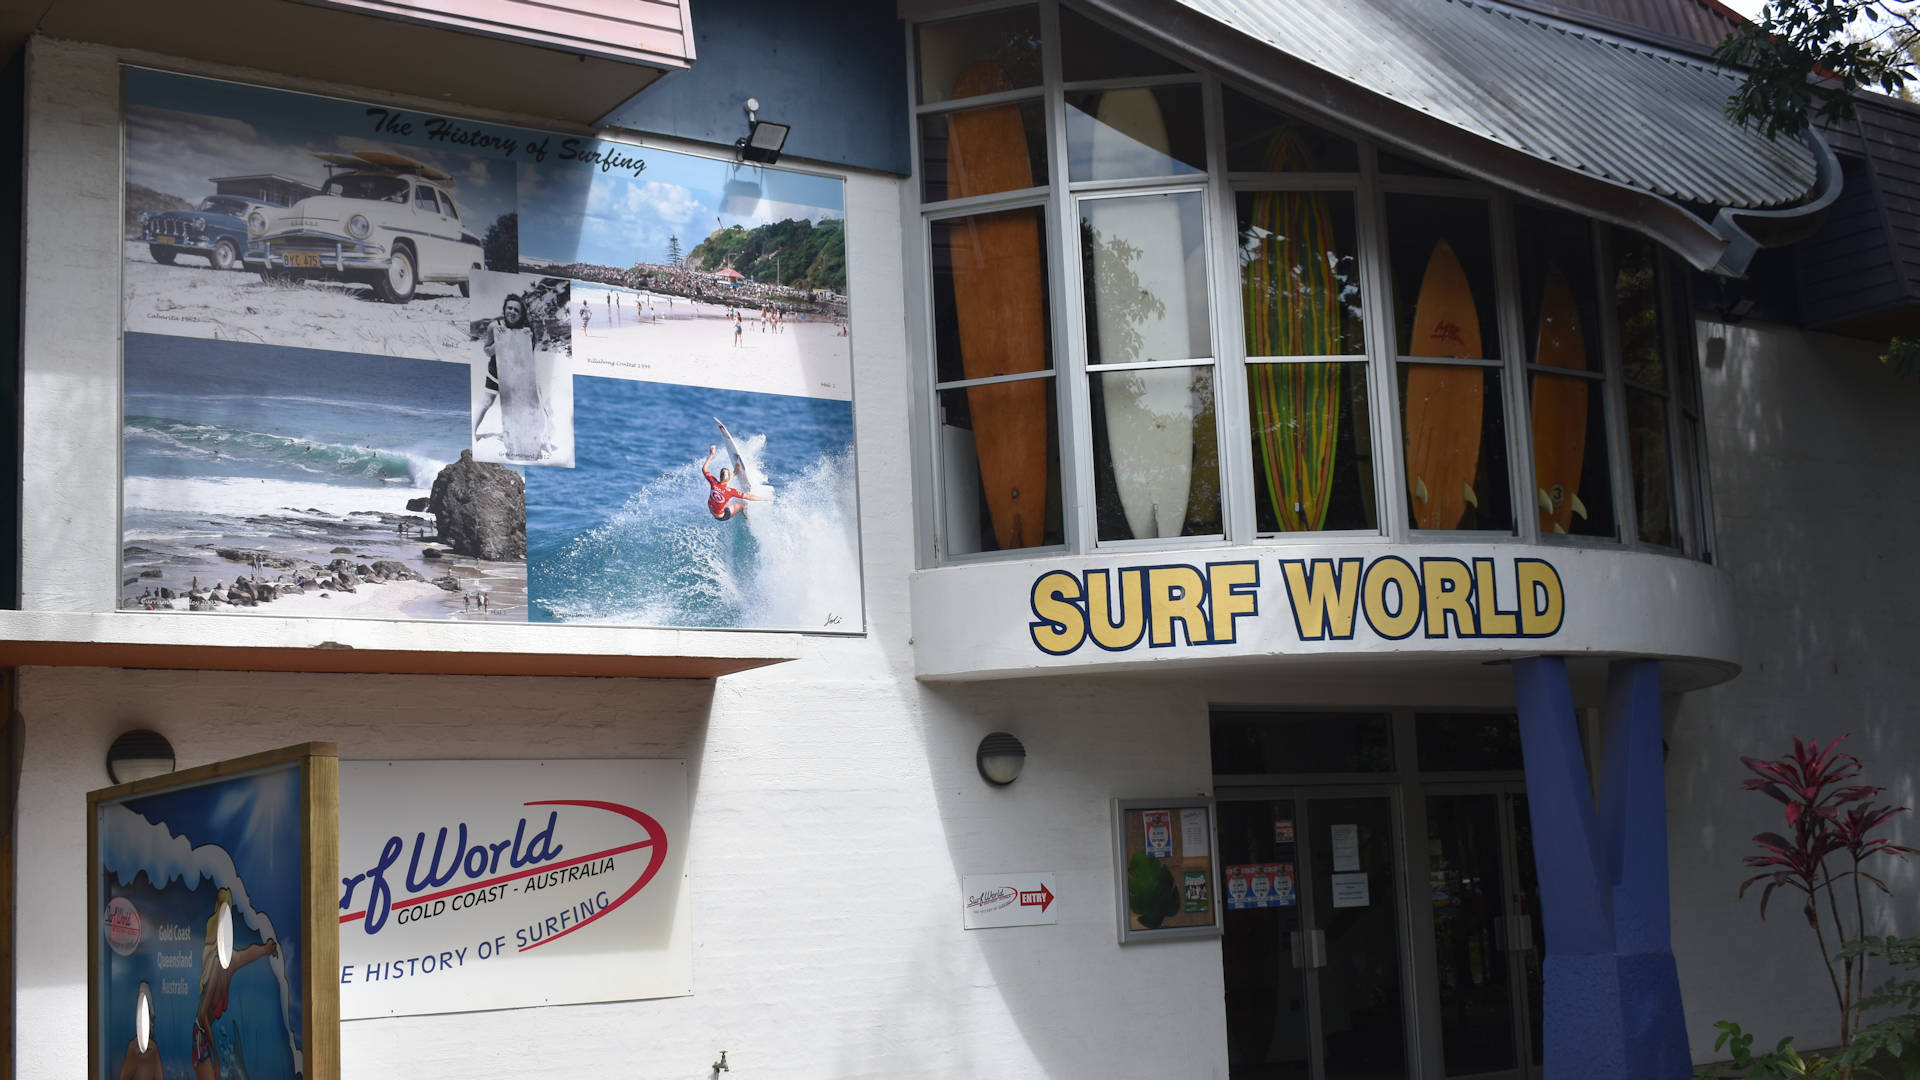 Entrance to the Surf World Museum in Currumbin, Gold Coast, Queensland